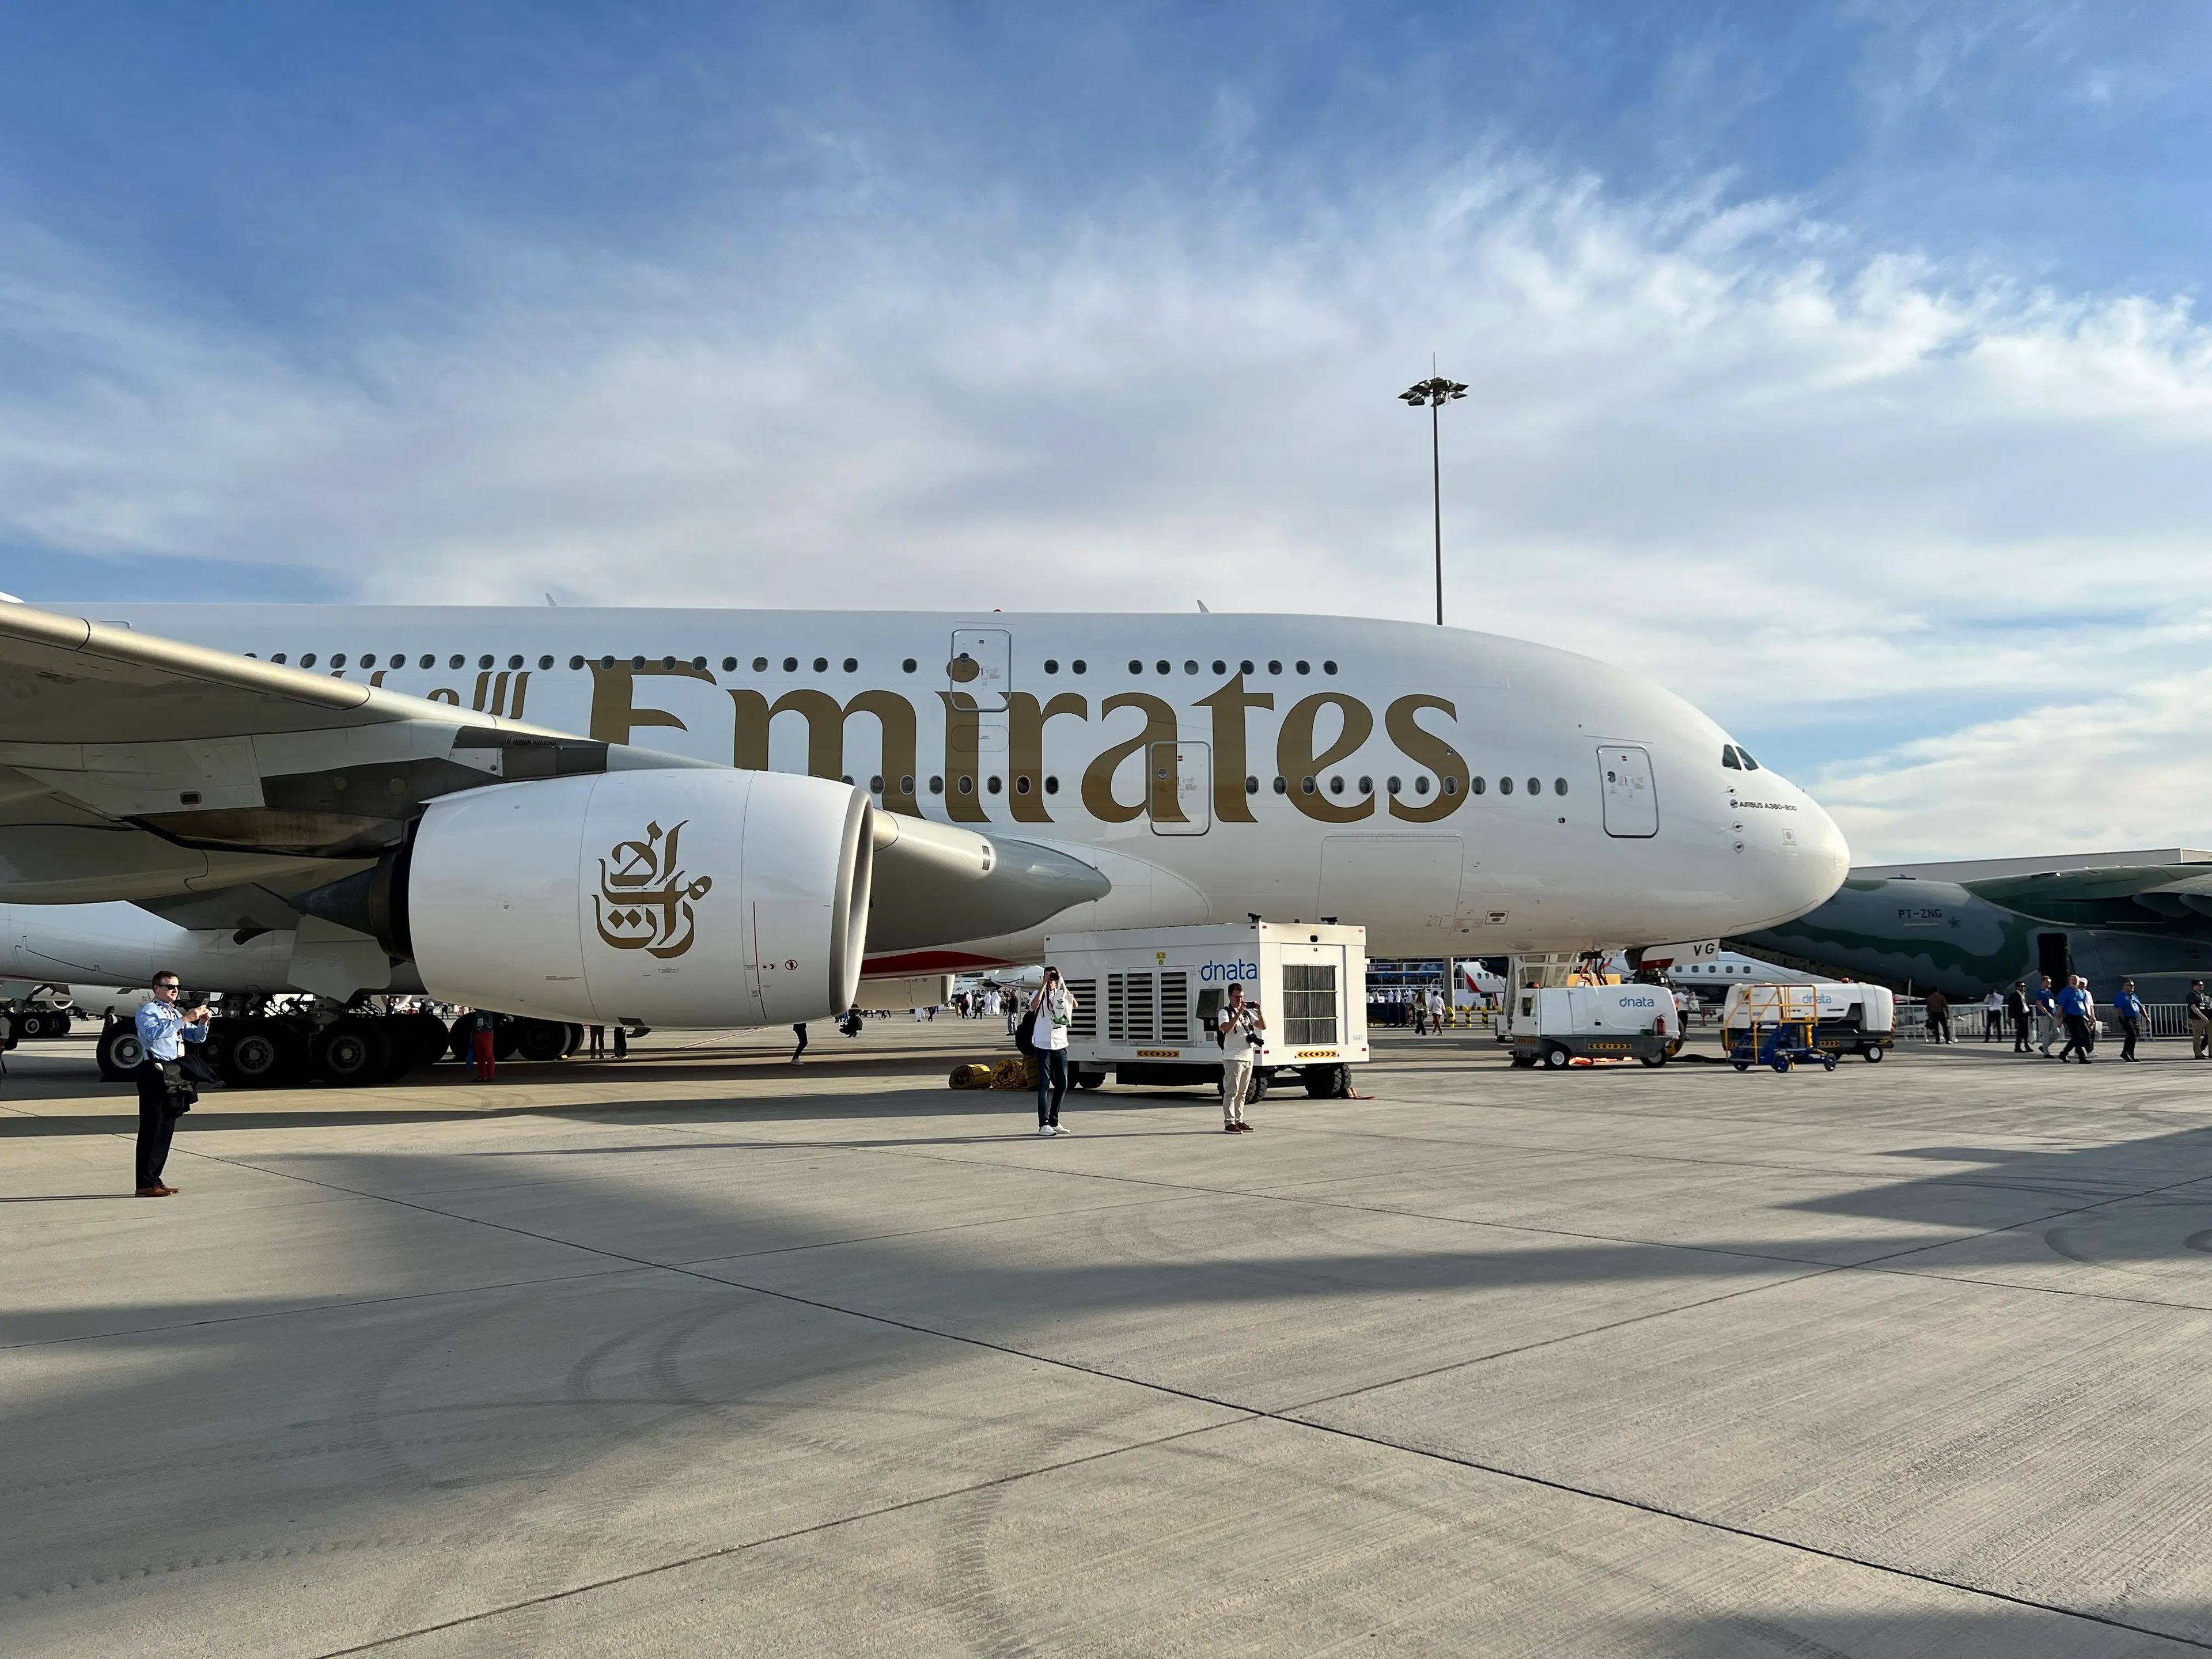 The front half of an Emirates Airbus A380 parked on the tarmac at the Dubai Airshow, with two photographers standing in front.